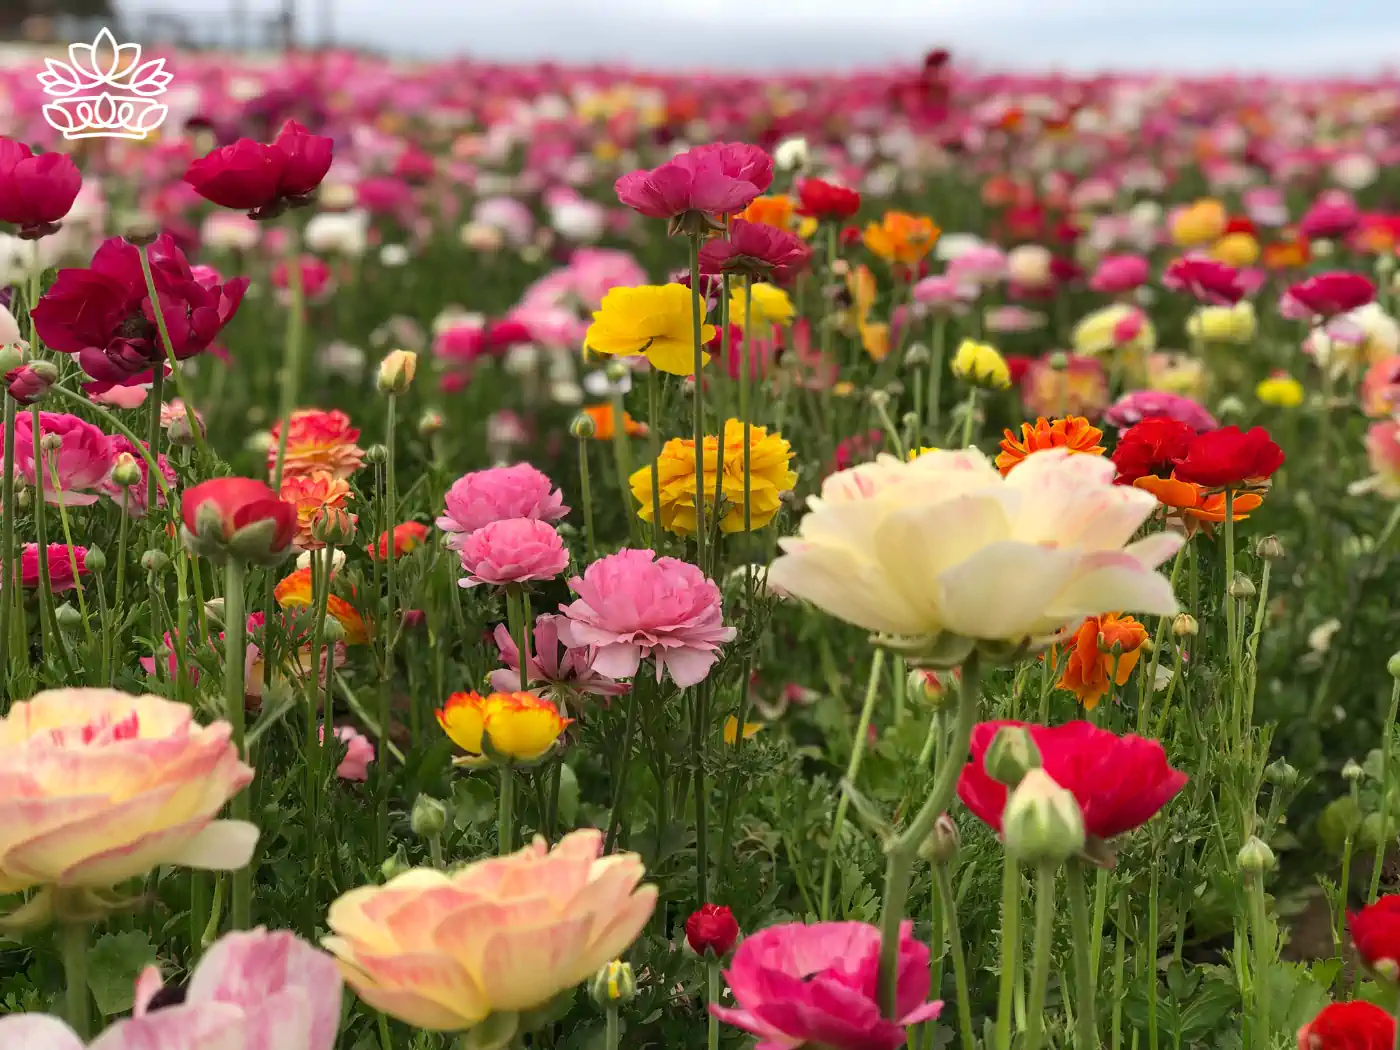 Close-up of a vibrant field of multicolored ranunculus flowers, showcasing shades of pink, red, yellow, and orange, vividly blooming in a lush garden. Fabulous Flowers and Gifts: Flower Arrangements Under R500, Delivered with Heart.